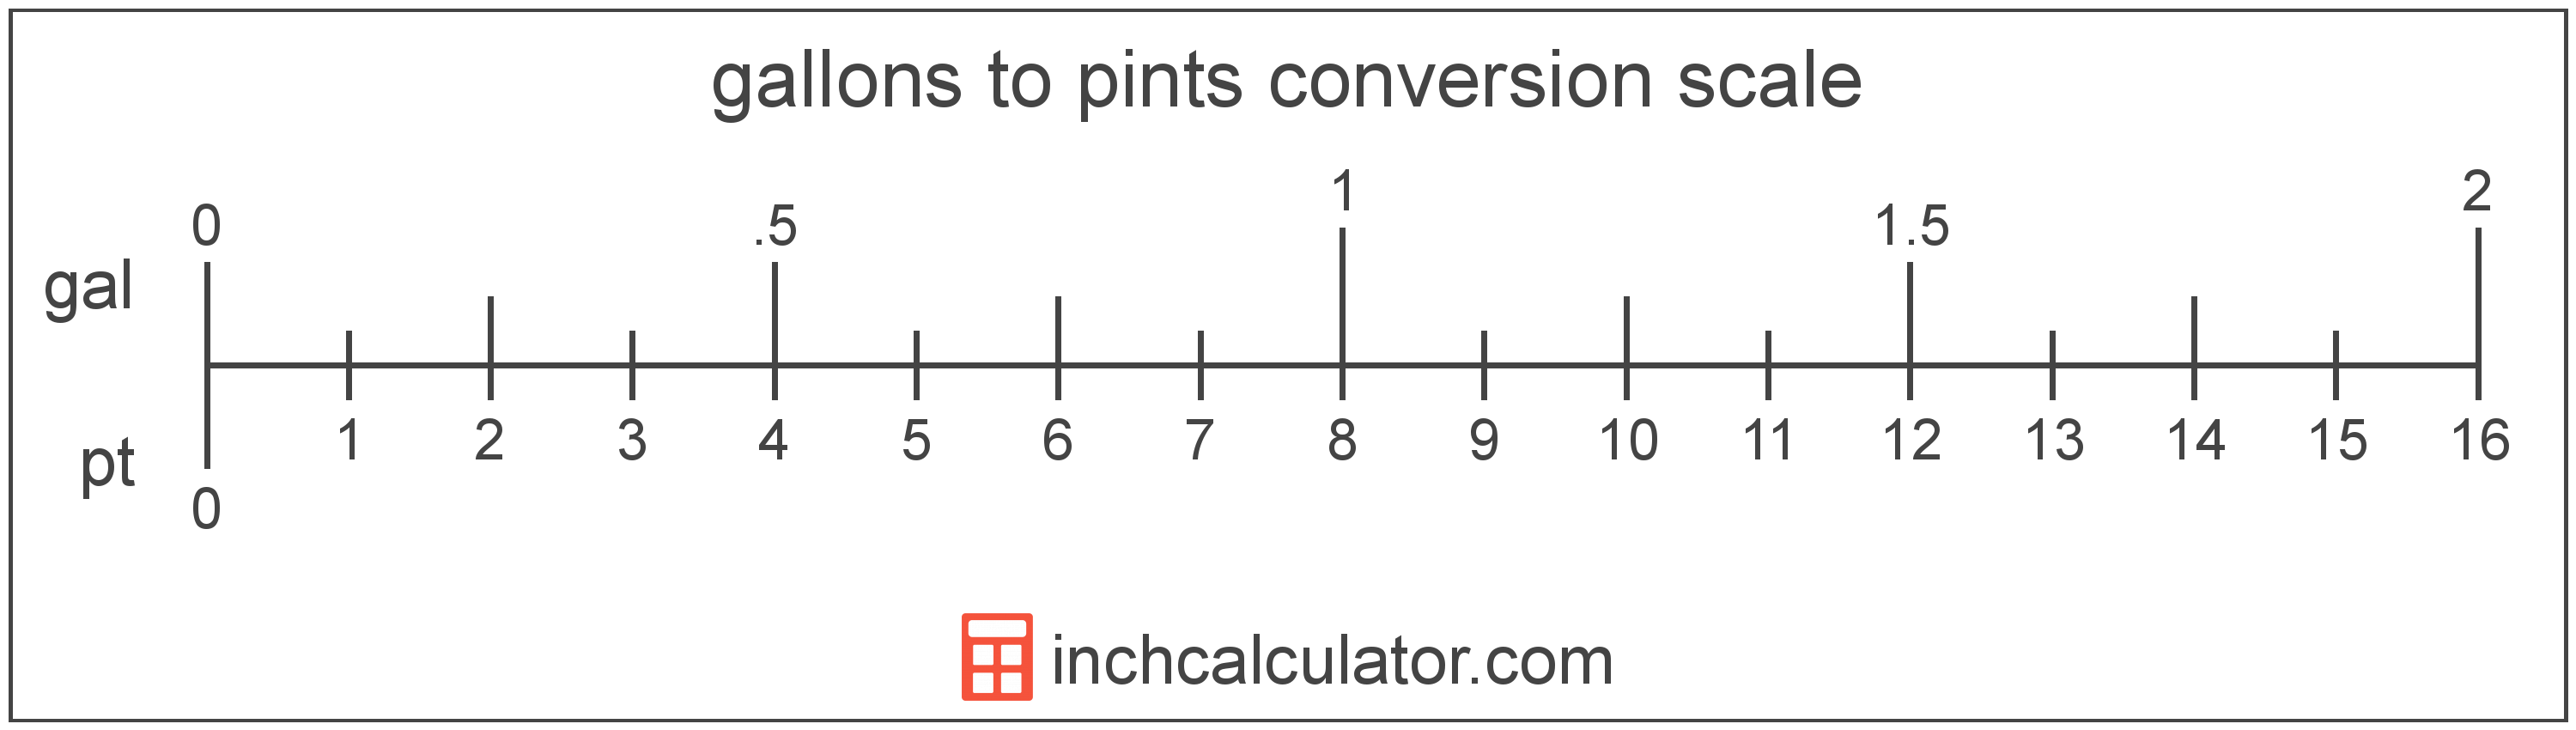 Gallons To Pints Conversion Chart